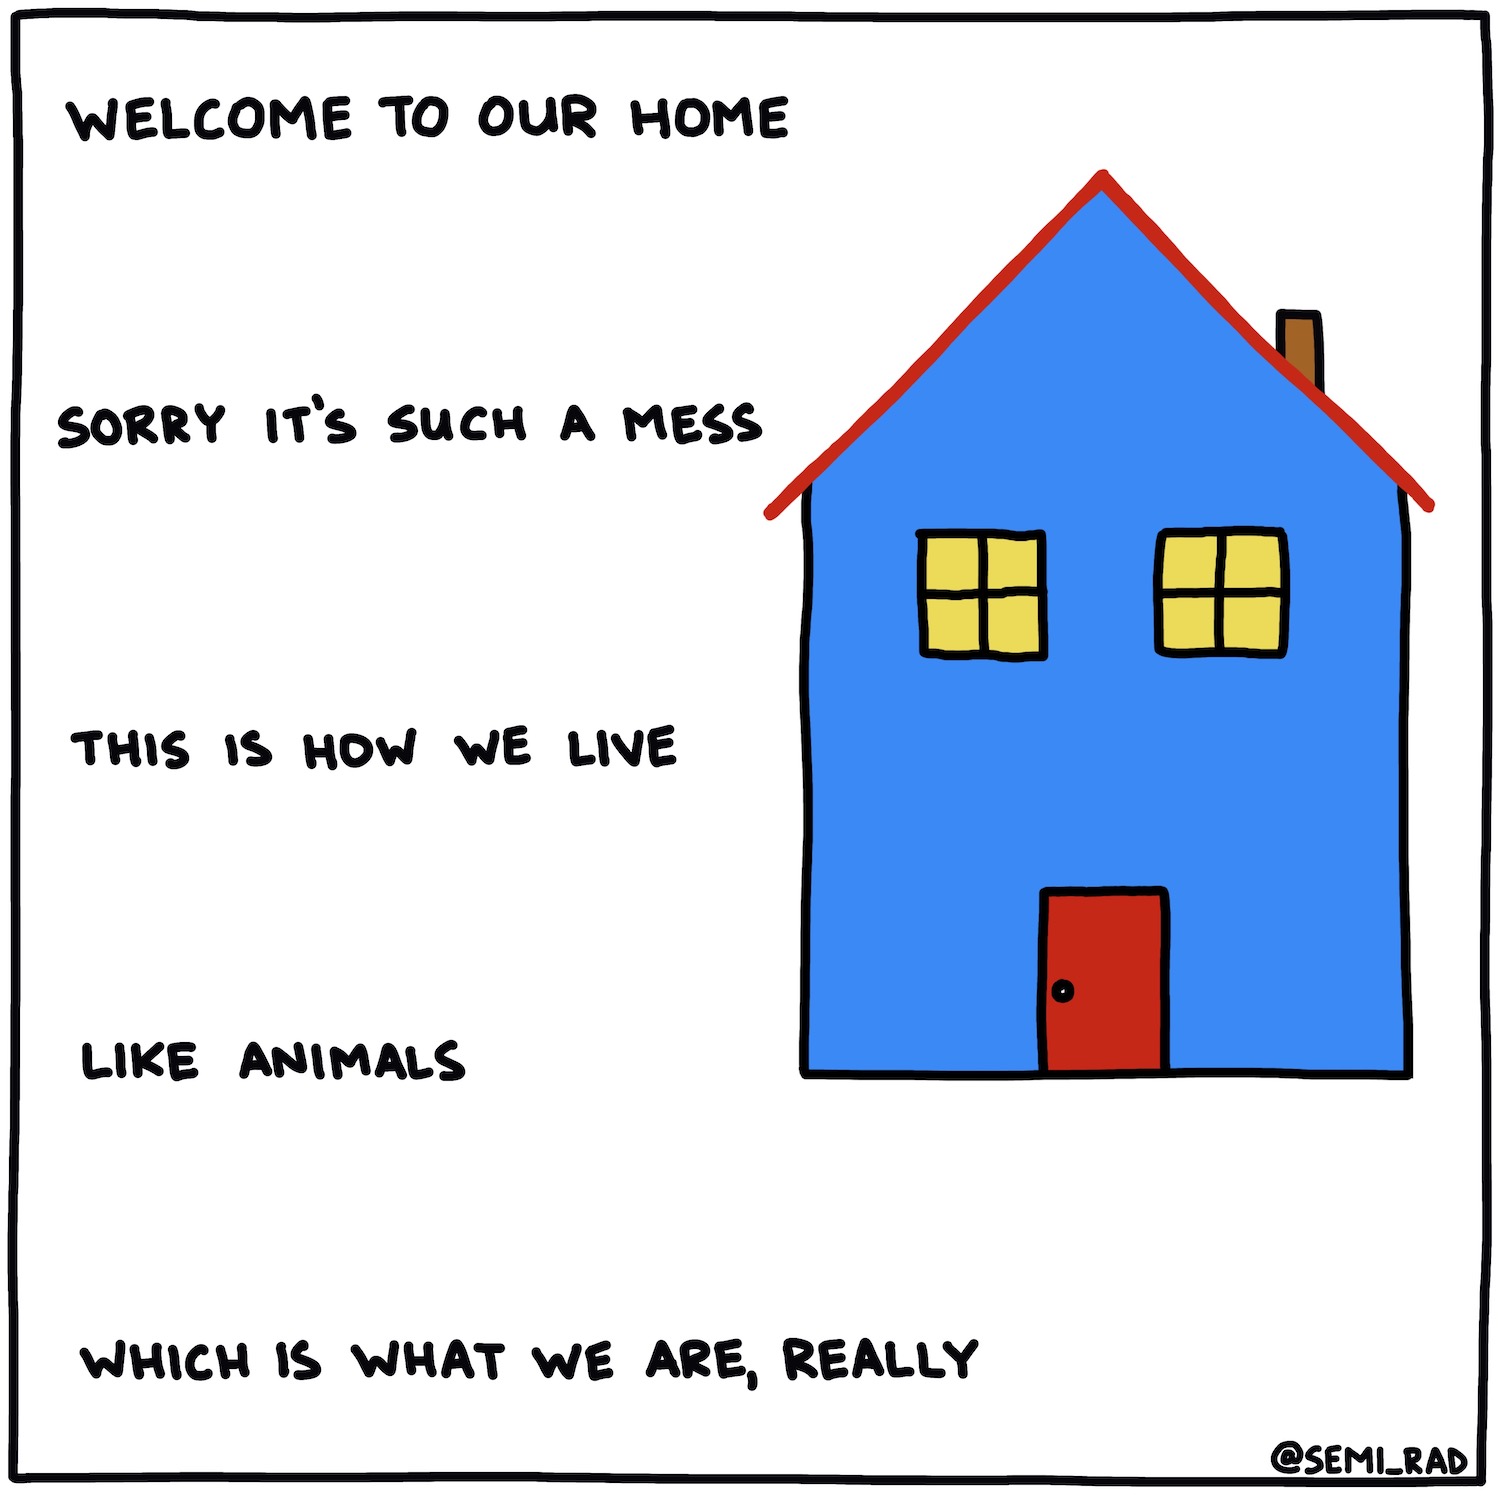 semi-rad drawing and poem: welcome to our home, sorry it's such a mess, this is how we live, like animals, which is what we are, really